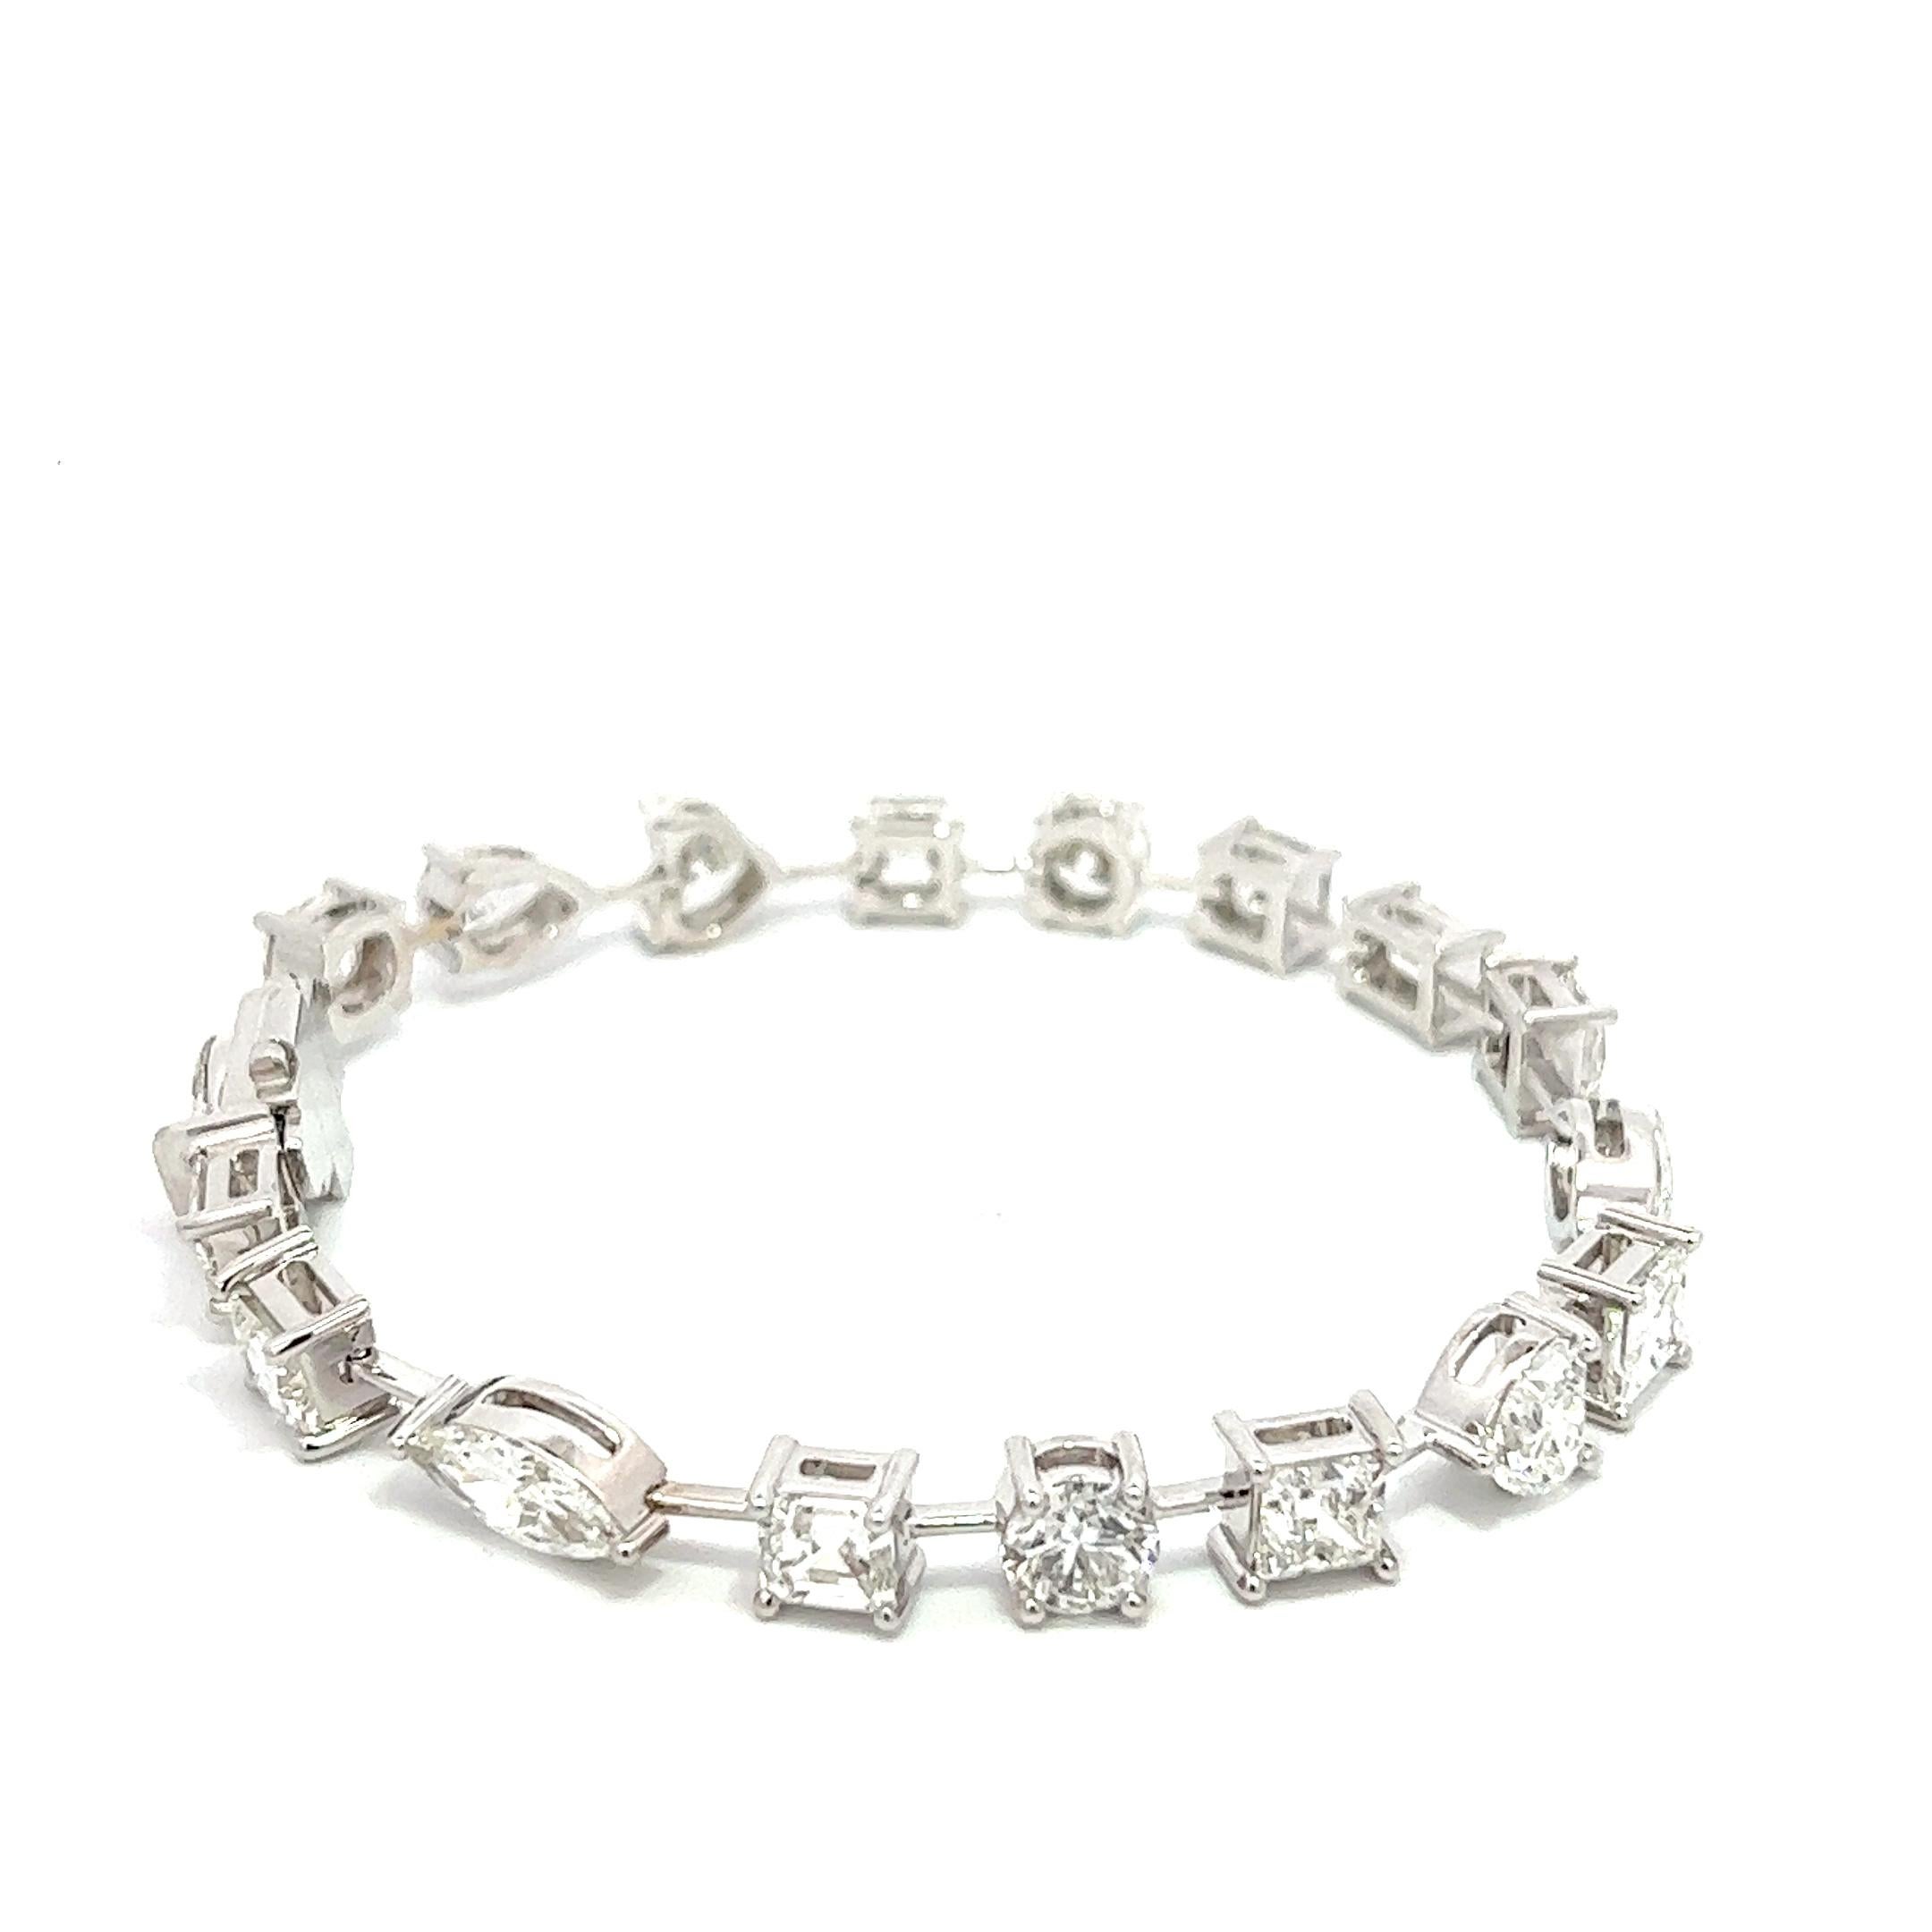 This stunning bracelet is truly one-of-a-kind, featuring a total weight of 13.11 carats of natural diamonds in various shapes. With 18 individual stones, each one is GIA certified, making this a truly high-end piece of jewelry. Crafted in 18k white